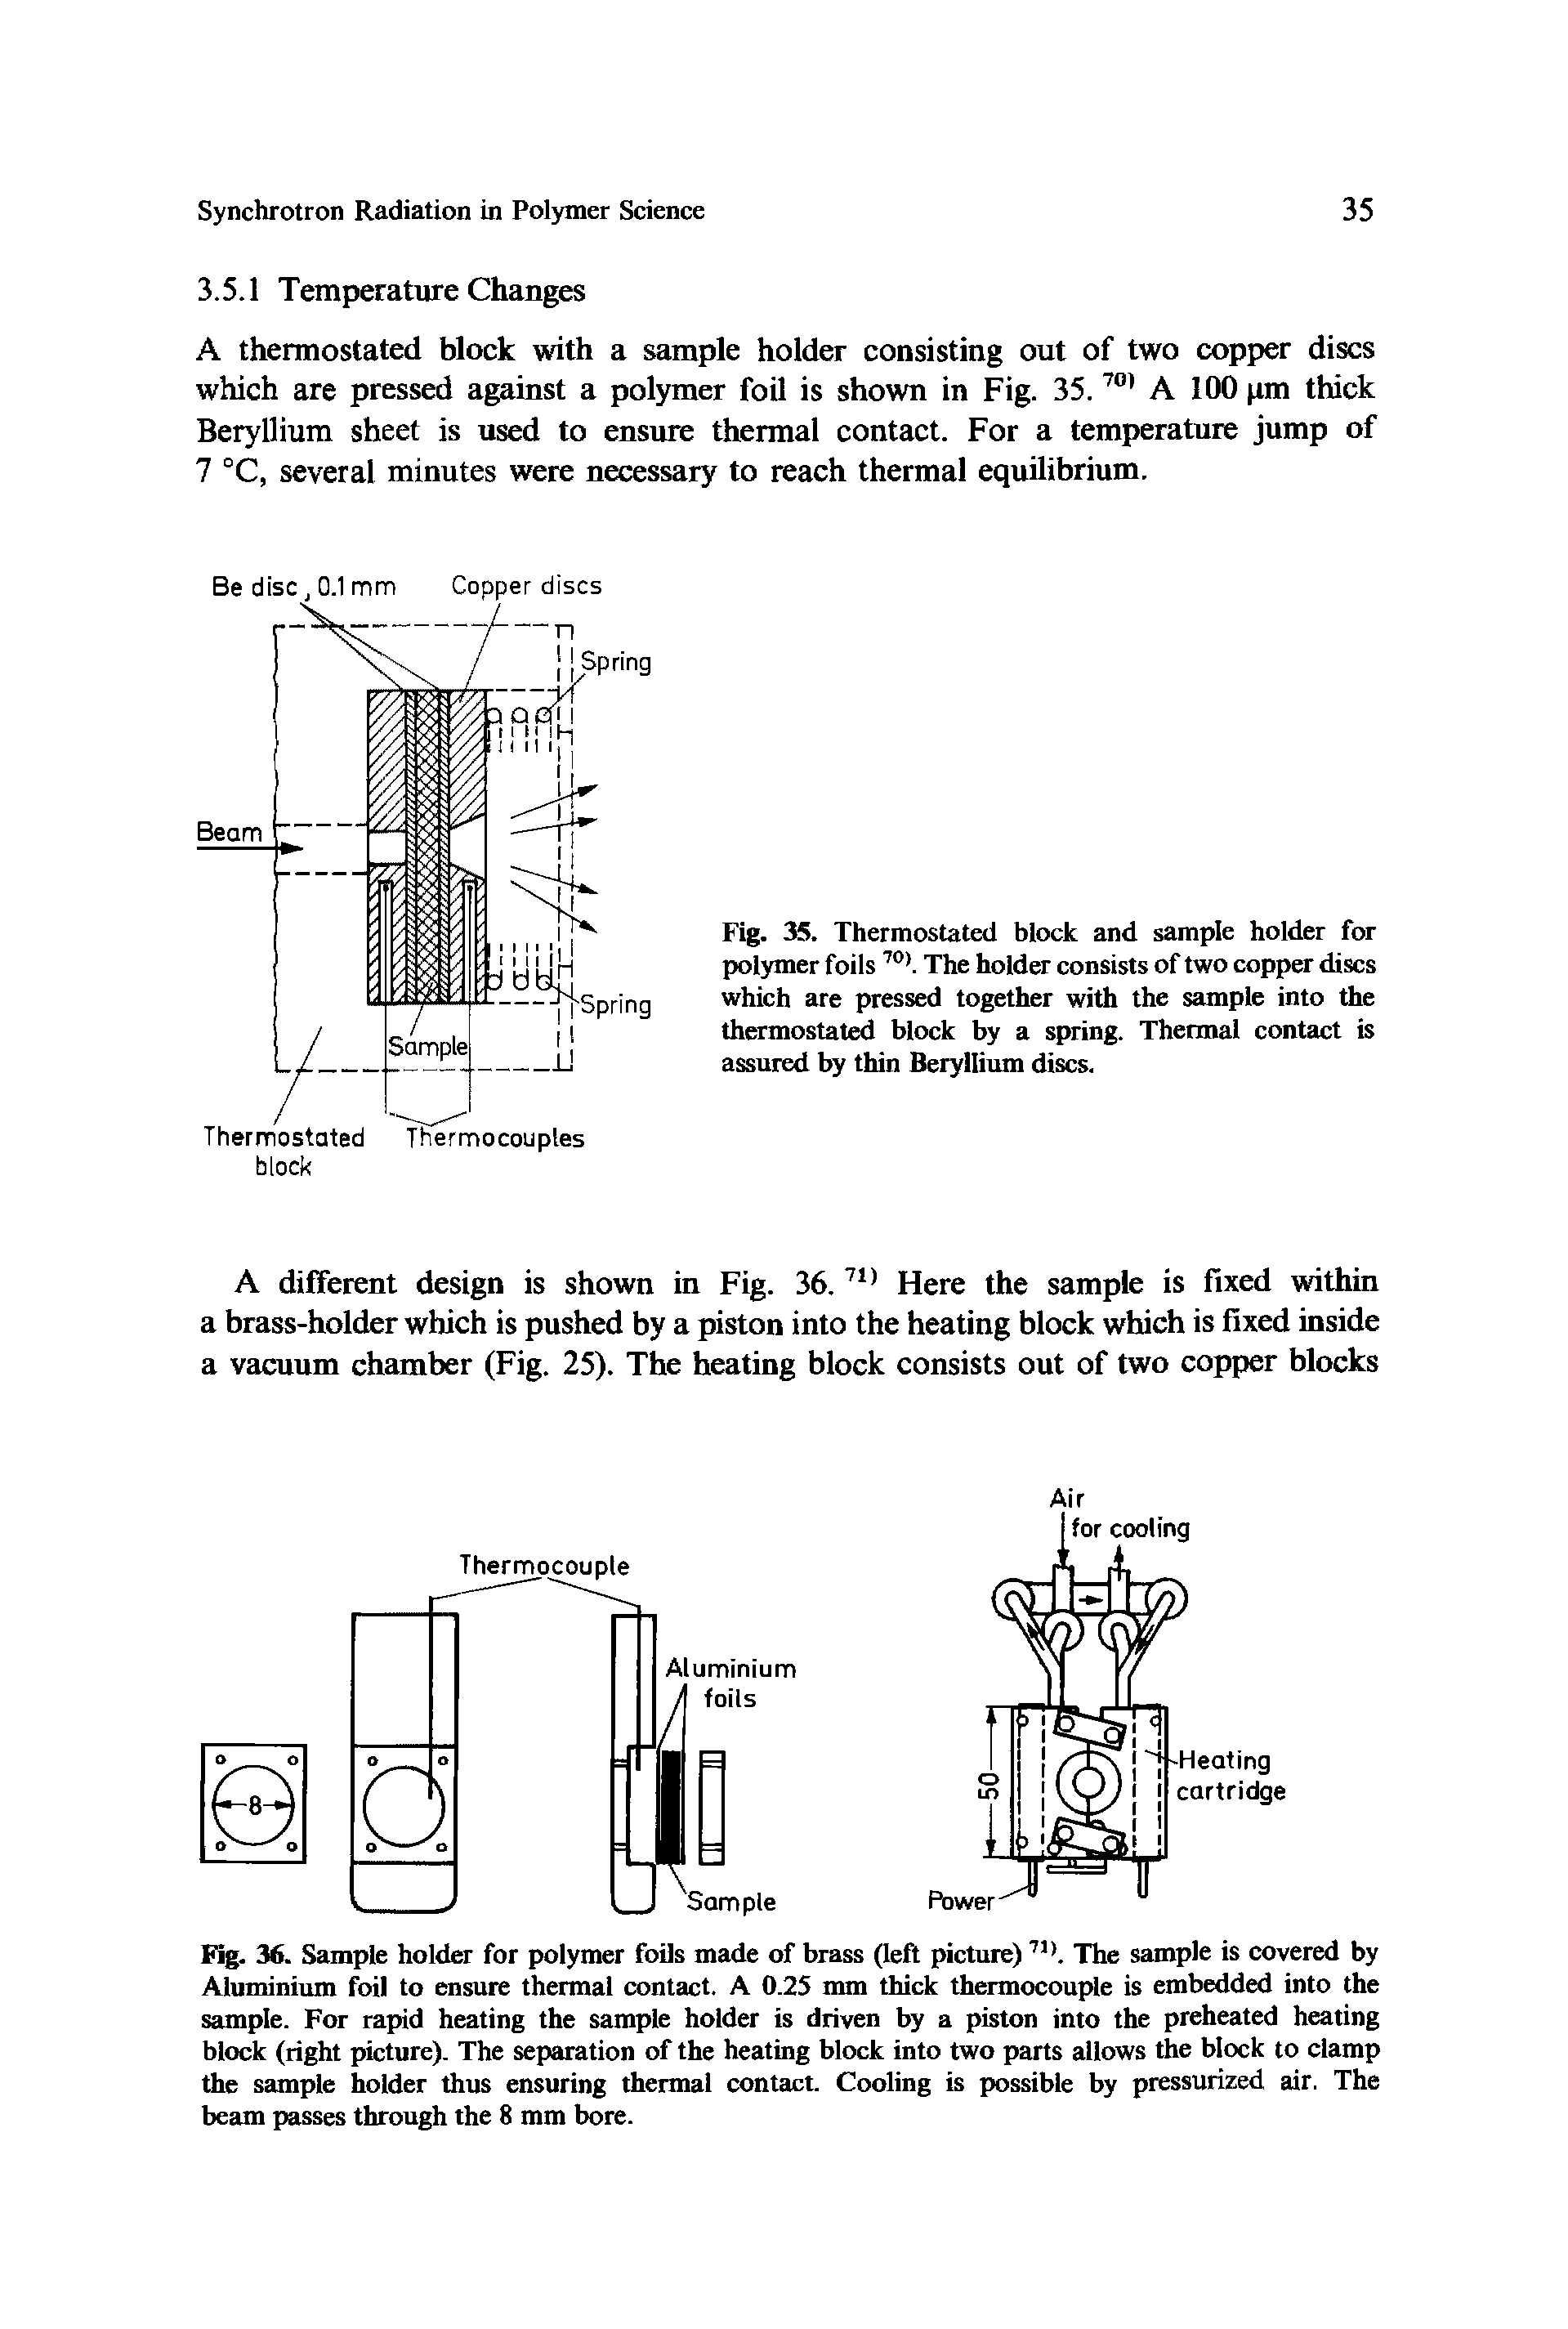 Fig. 35. Thermostated block and sample holder for polymer foils The holder consists of two copper discs...